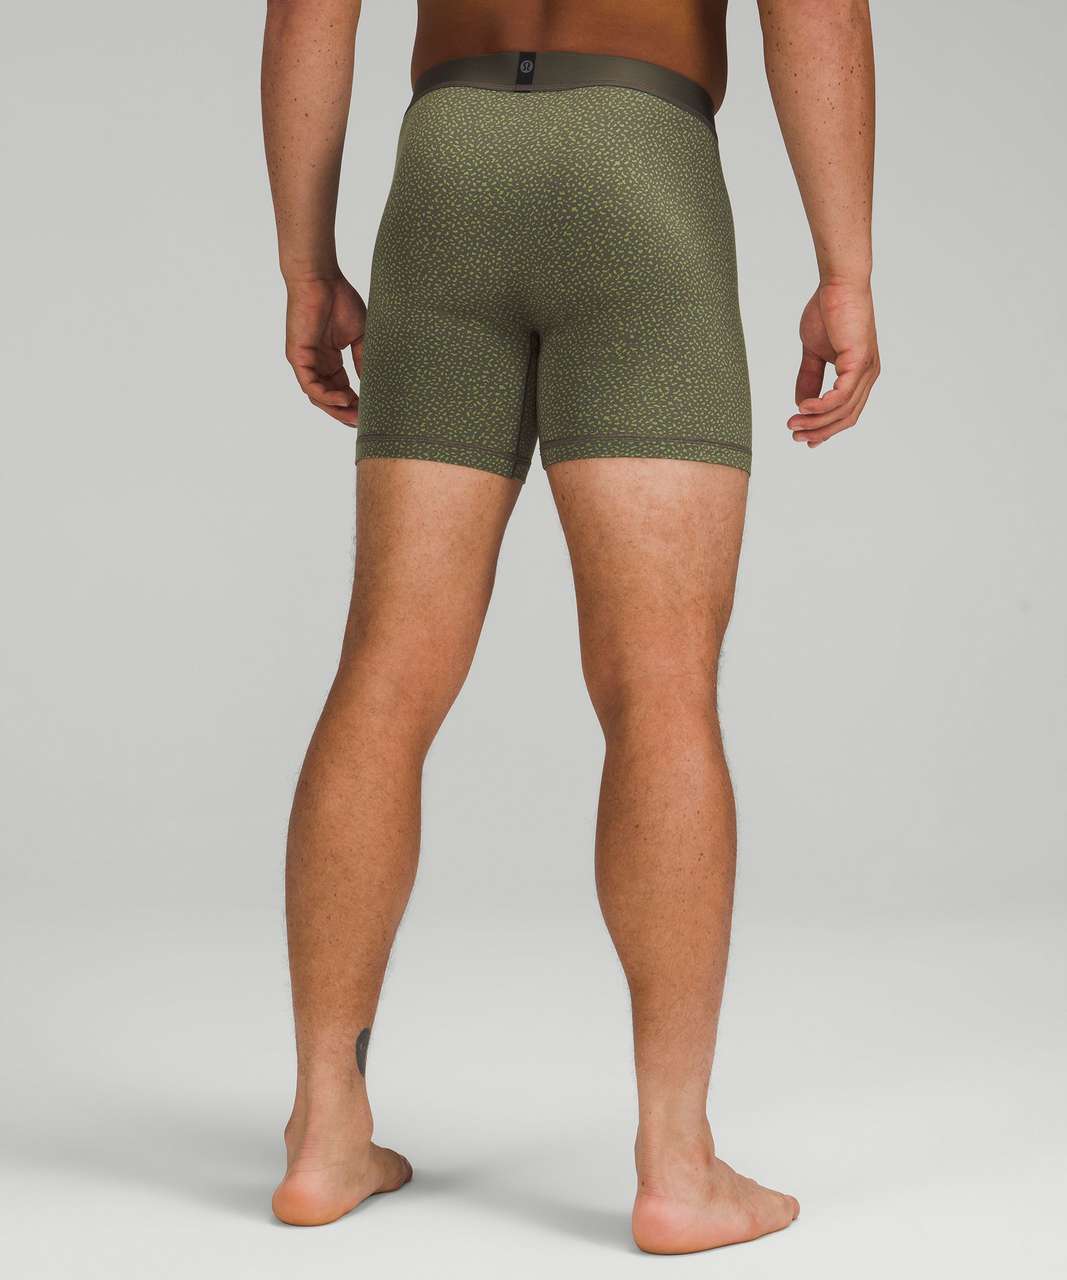 Lululemon Always In Motion Boxer 5" 5 Pack - Heathered Roasted Brown / Canyon Rock / Compact Camo Carob Brown Green Foliage / Heathered Icing Blue / Tidewater Teal